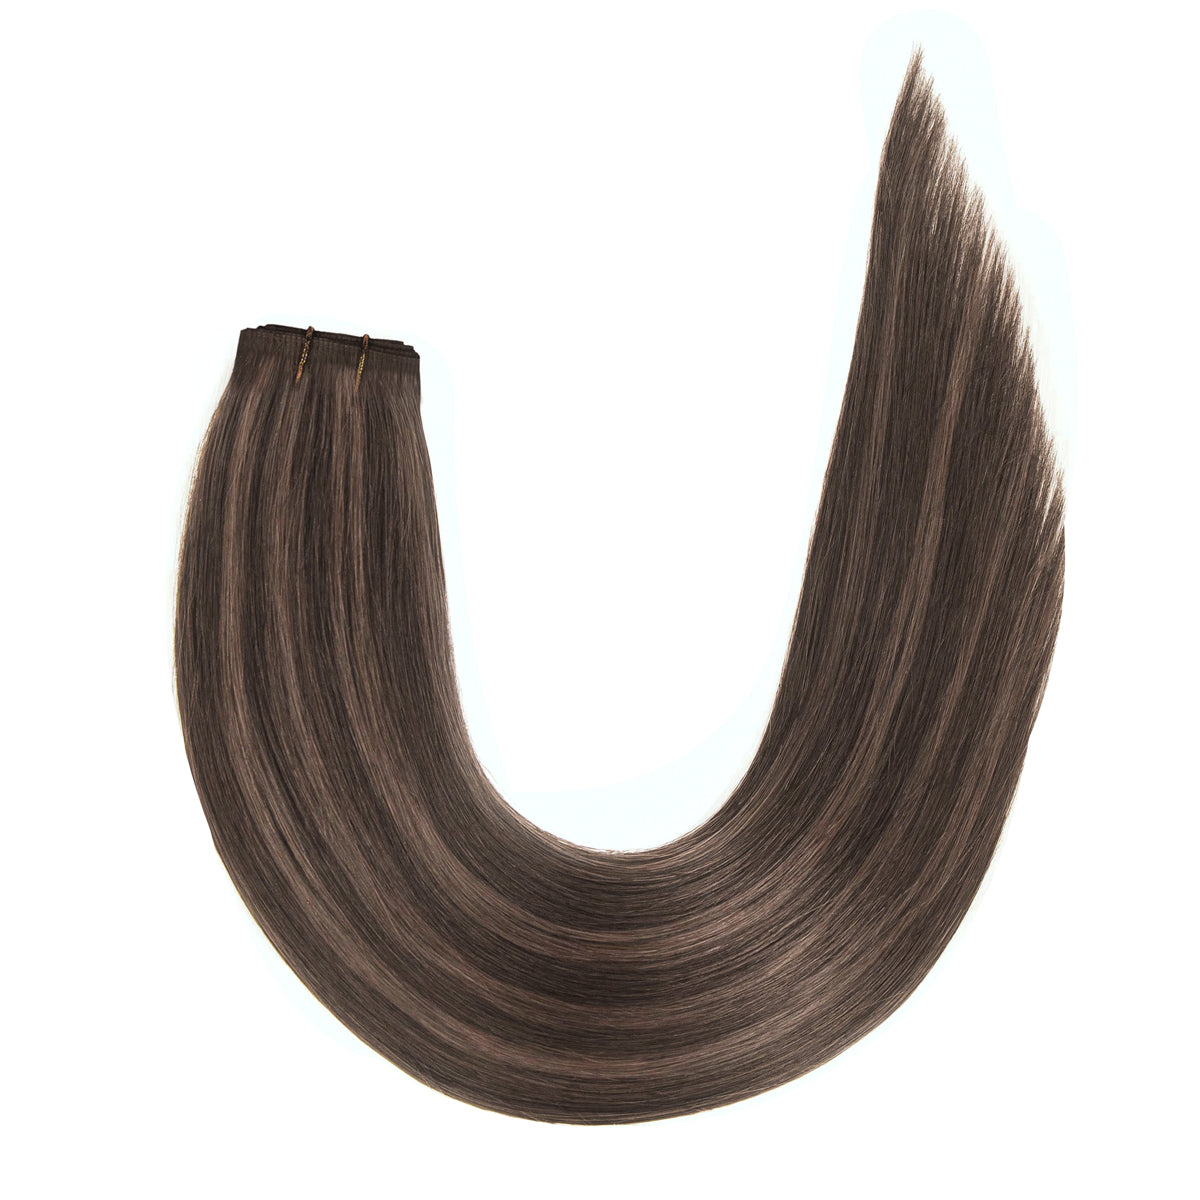 Flat Weft Hair Extensions #2c/8a Chocolate and Ash Brown Mix 22"